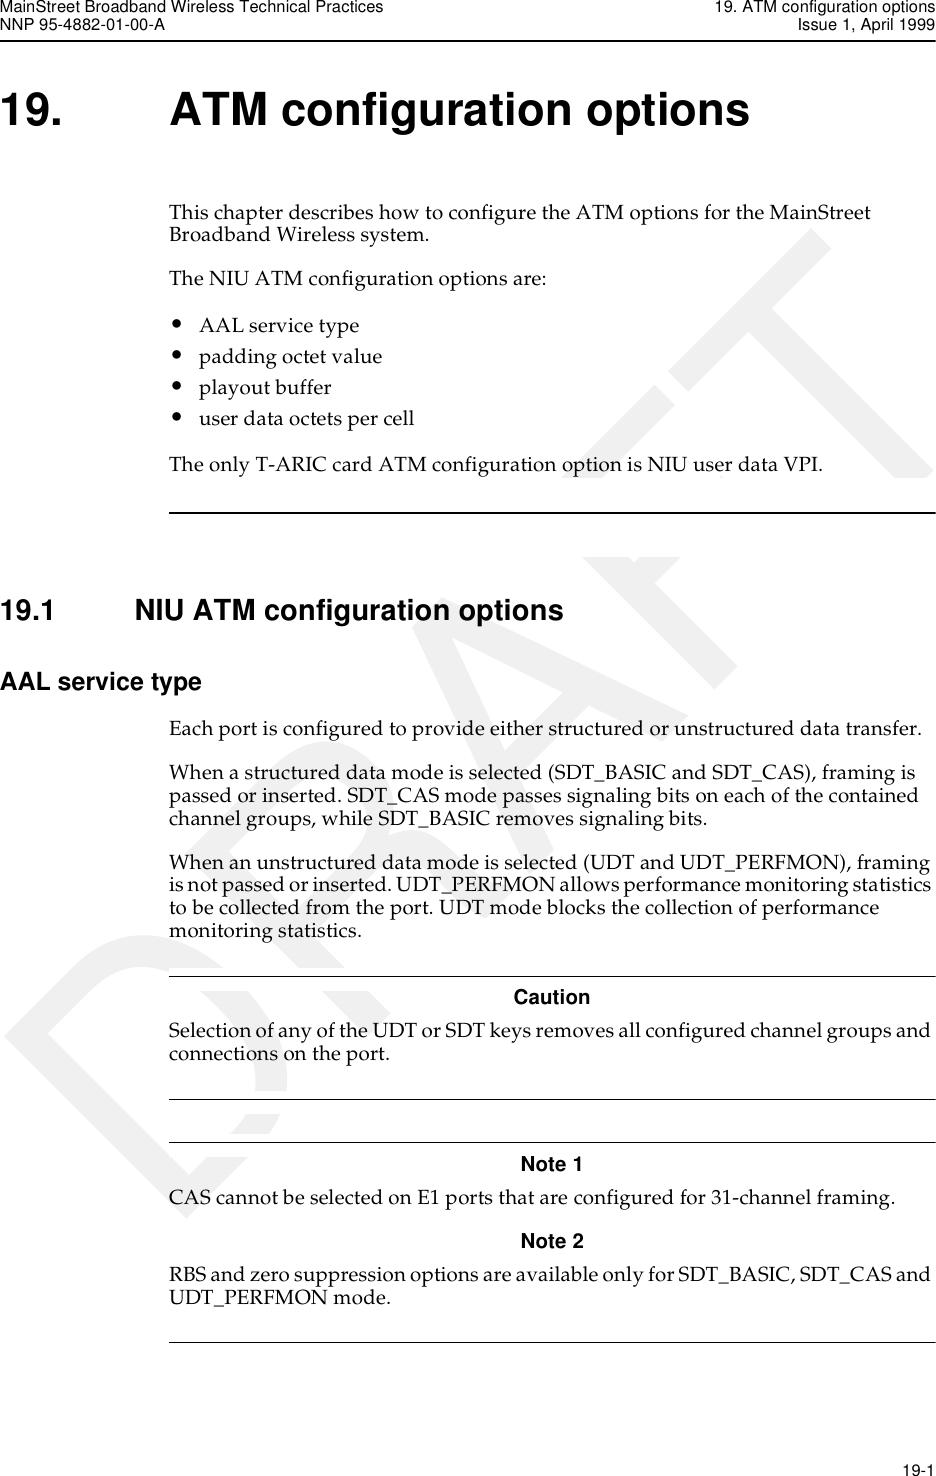 MainStreet Broadband Wireless Technical Practices 19. ATM configuration optionsNNP 95-4882-01-00-A Issue 1, April 1999   19-1DRAFT19. ATM configuration optionsThis chapter describes how to configure the ATM options for the MainStreet Broadband Wireless system. The NIU ATM configuration options are:•AAL service type•padding octet value•playout buffer•user data octets per cell The only T-ARIC card ATM configuration option is NIU user data VPI.19.1 NIU ATM configuration optionsAAL service typeEach port is configured to provide either structured or unstructured data transfer.When a structured data mode is selected (SDT_BASIC and SDT_CAS), framing is passed or inserted. SDT_CAS mode passes signaling bits on each of the contained channel groups, while SDT_BASIC removes signaling bits.When an unstructured data mode is selected (UDT and UDT_PERFMON), framing is not passed or inserted. UDT_PERFMON allows performance monitoring statistics to be collected from the port. UDT mode blocks the collection of performance monitoring statistics.CautionSelection of any of the UDT or SDT keys removes all configured channel groups and connections on the port. Note 1 CAS cannot be selected on E1 ports that are configured for 31-channel framing.Note 2 RBS and zero suppression options are available only for SDT_BASIC, SDT_CAS and UDT_PERFMON mode. 